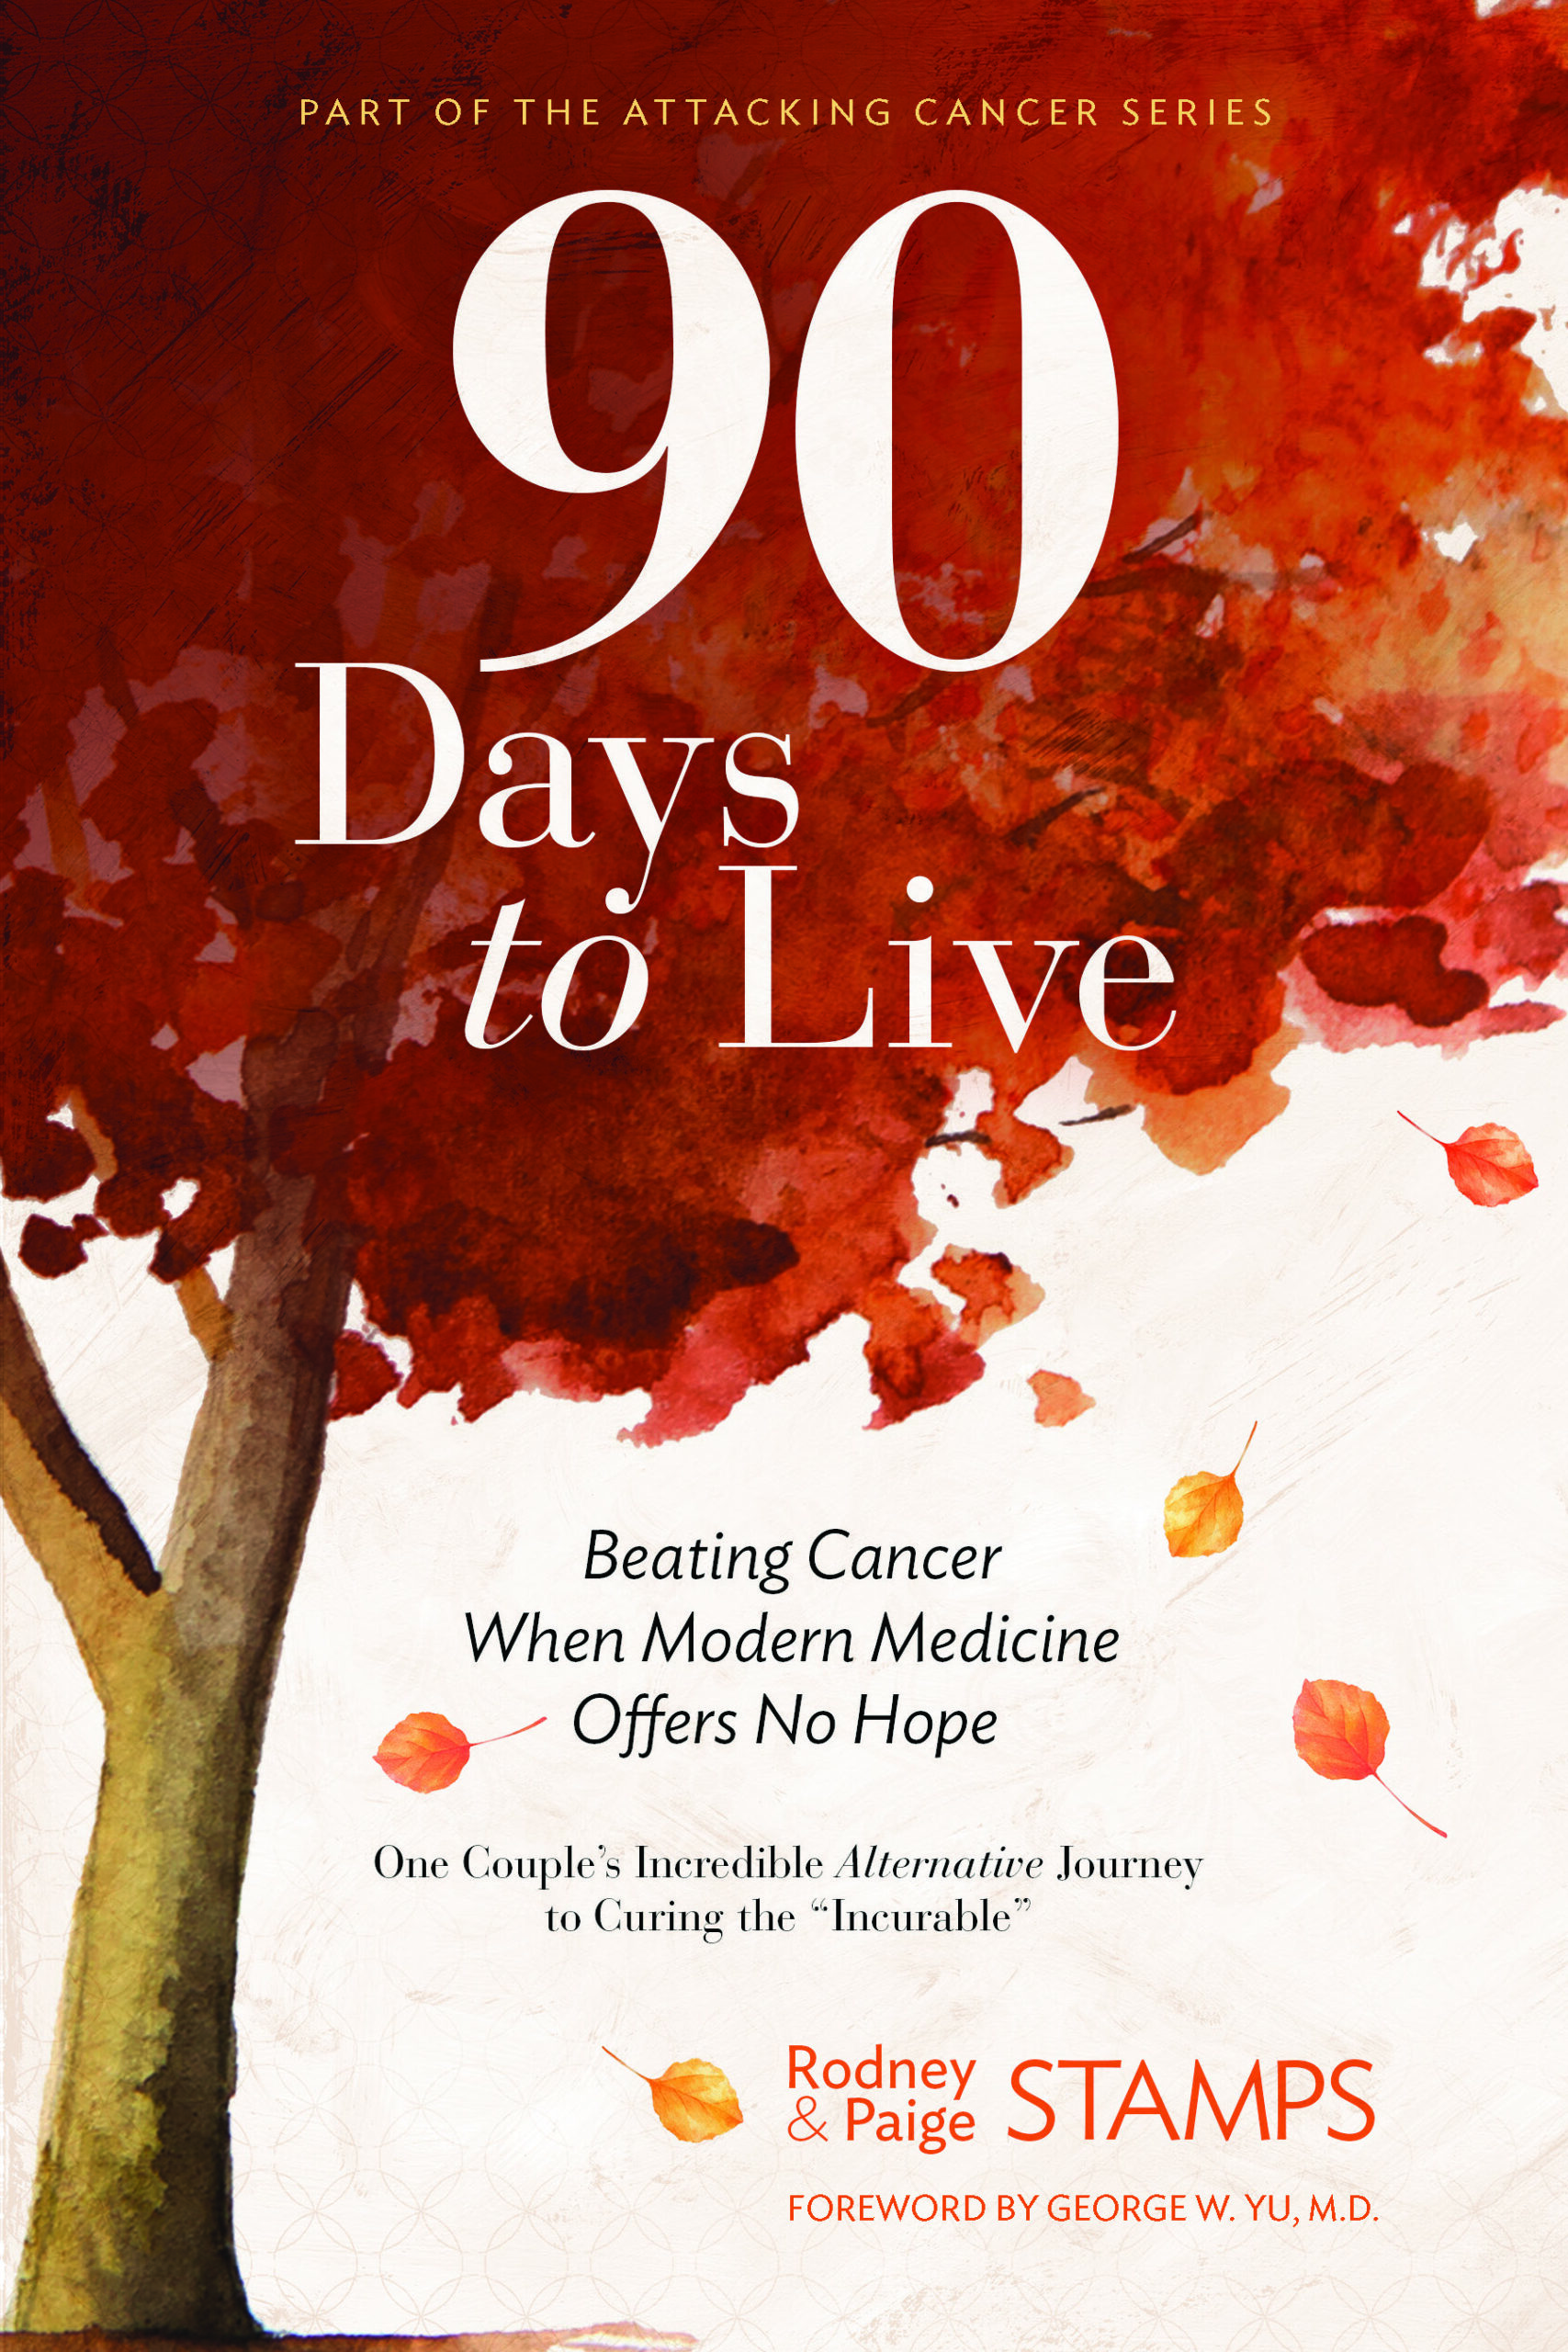 FREE: 90 Days to Live by Rodney Stamps